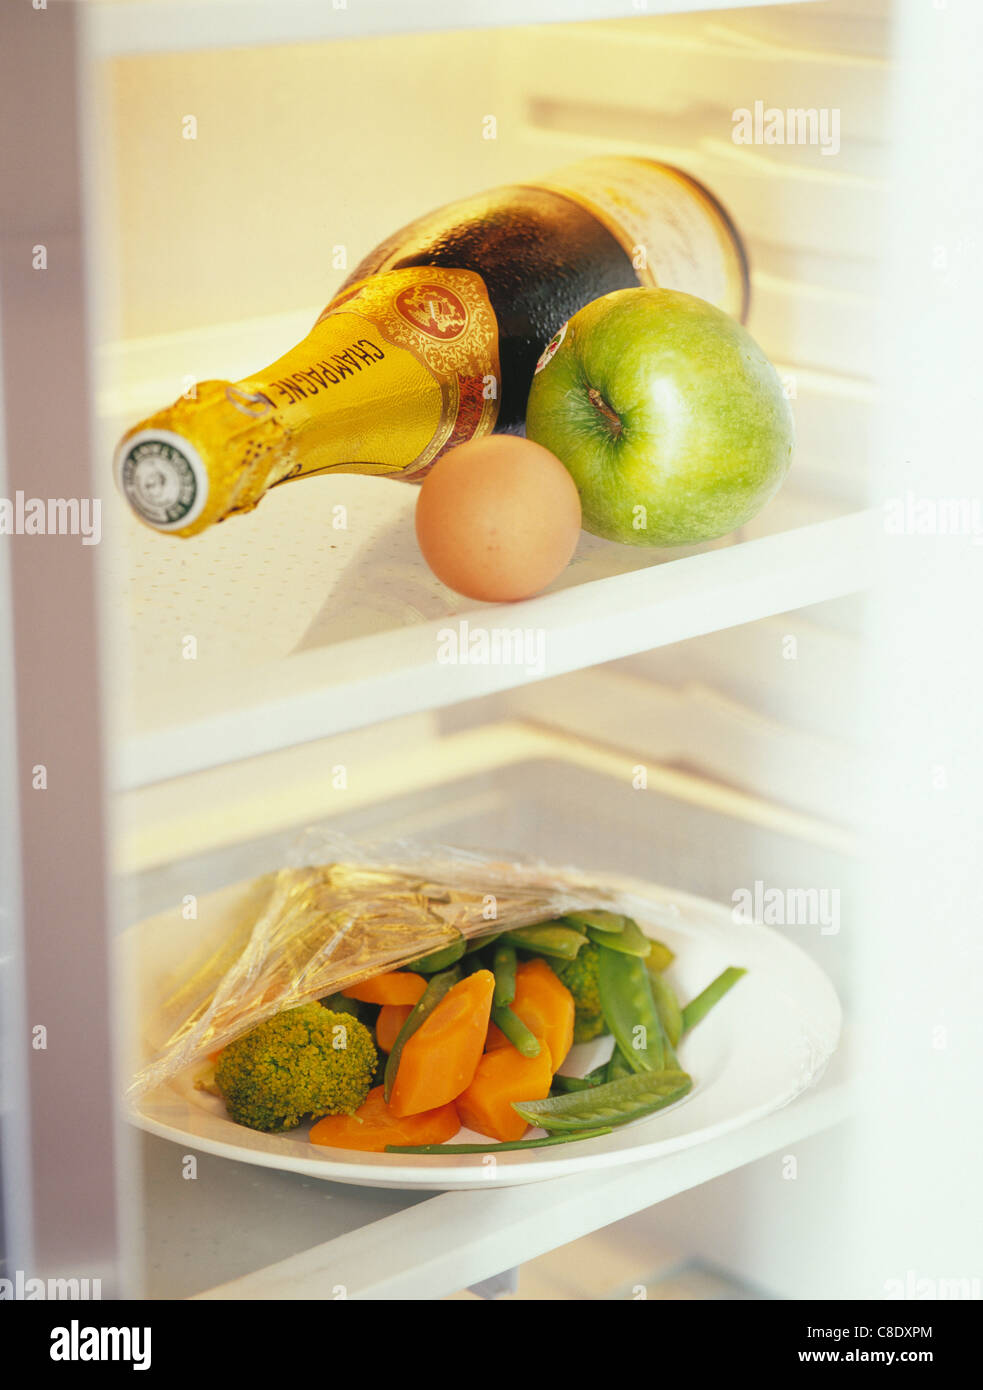 Food in a refrigerator Stock Photo